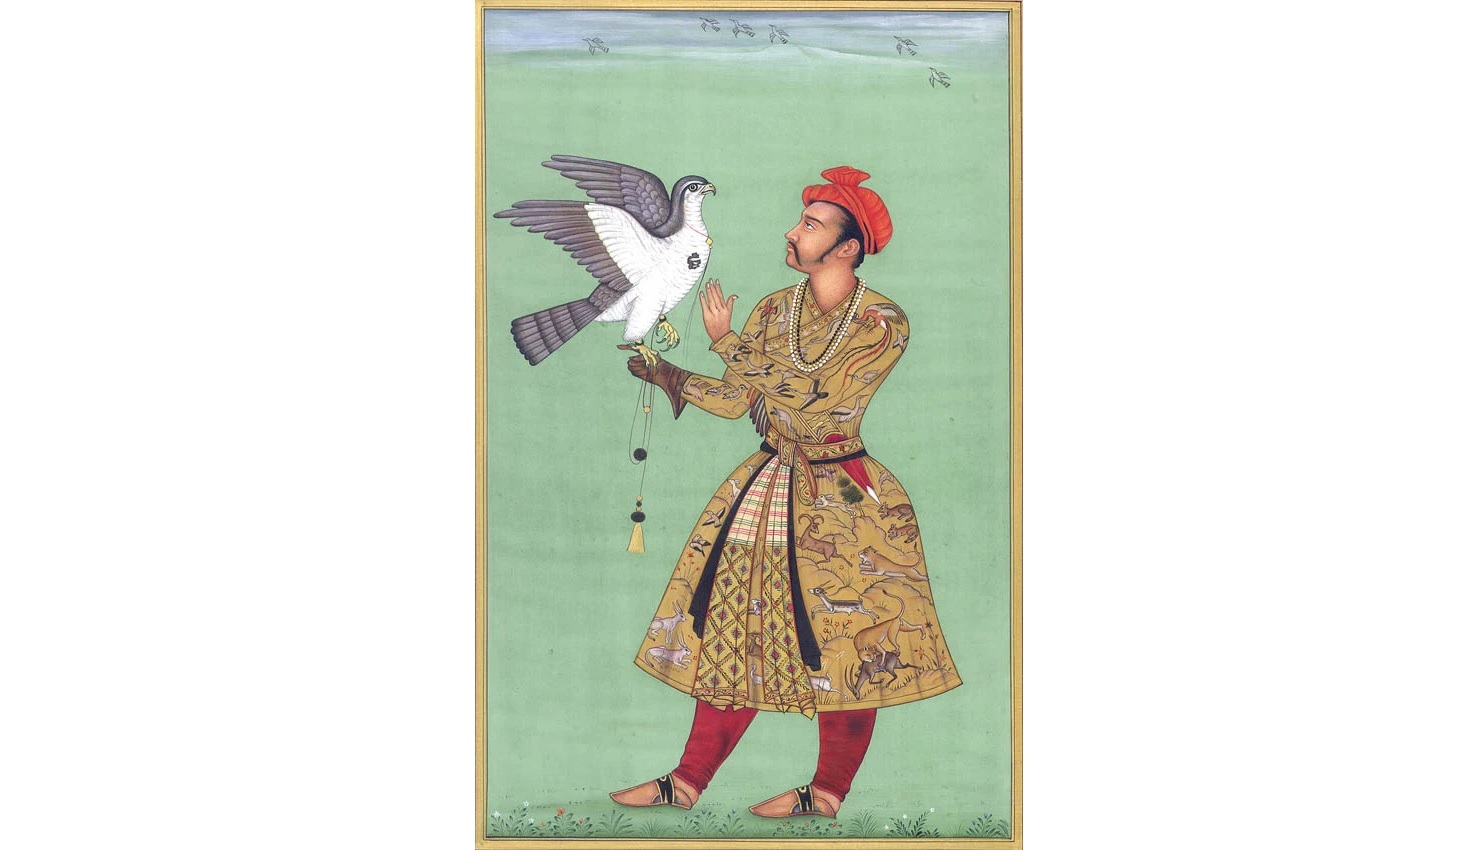 Birds and Animals in Indian Art - The Mughal Artist as a Naturalist